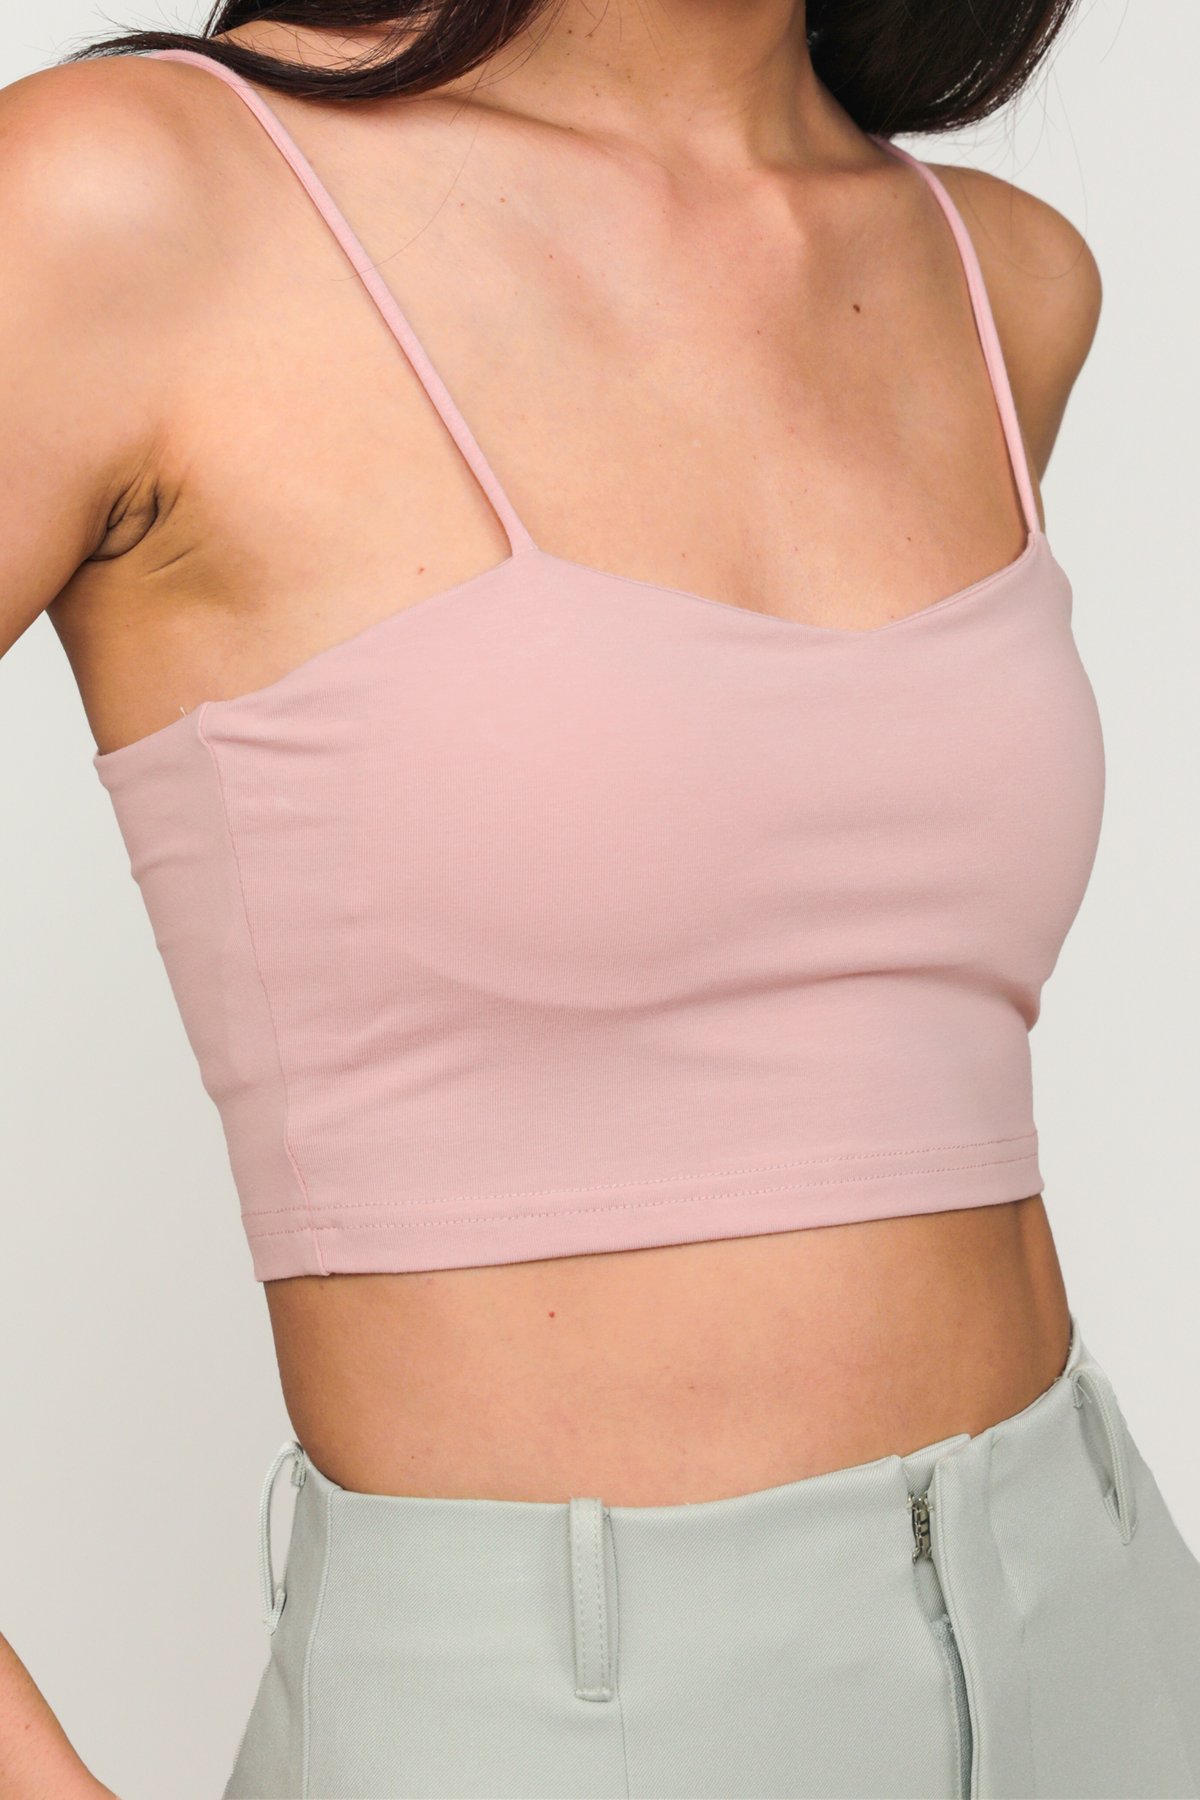 Eve Bustier Padded Top (Pink)